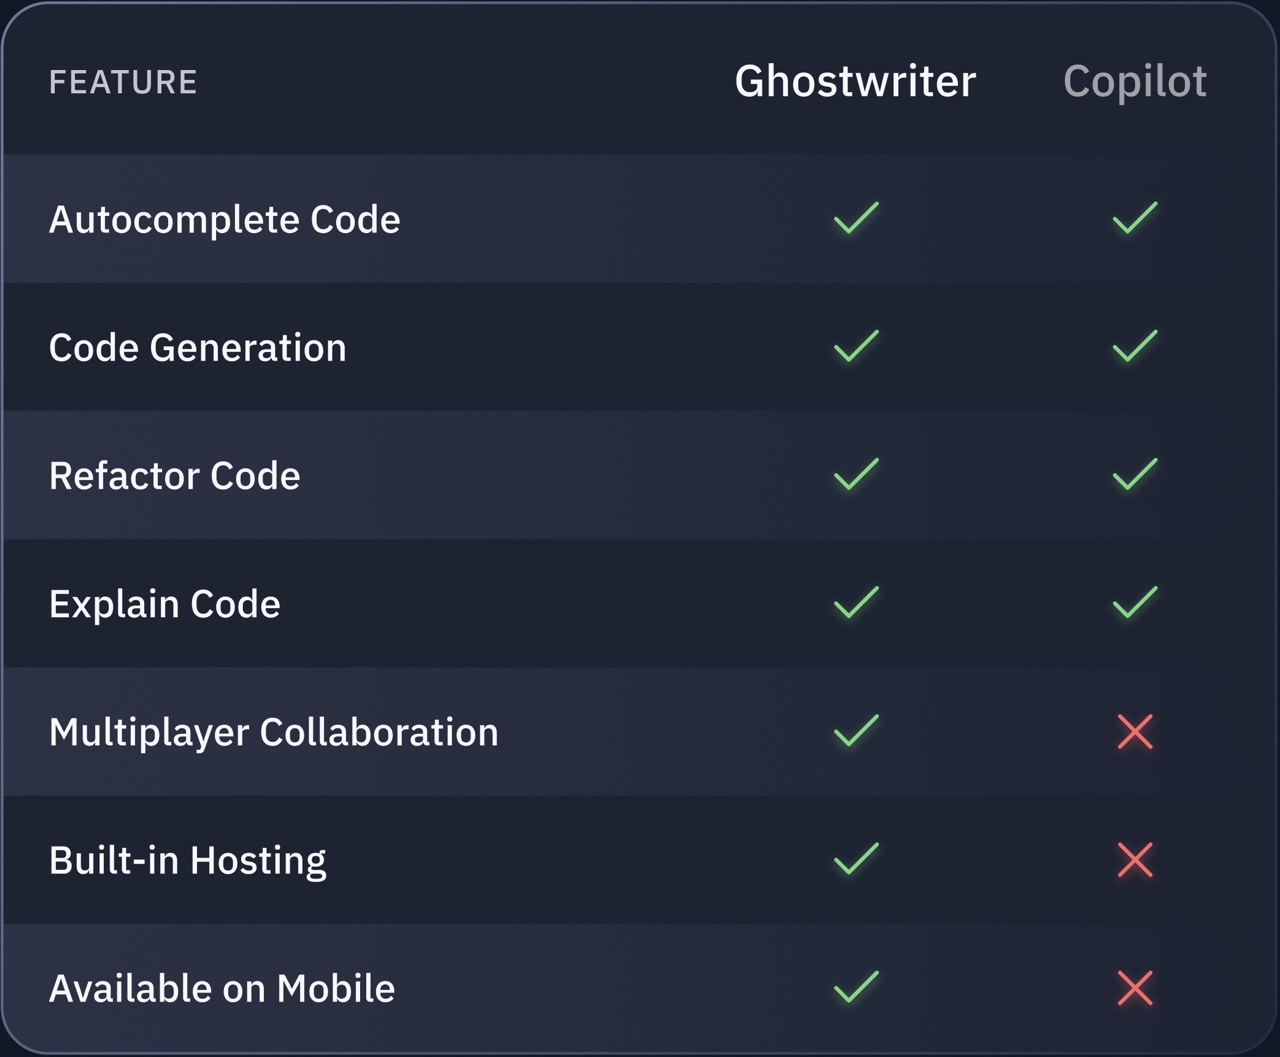 comparing ghostwriter features to github copilot features